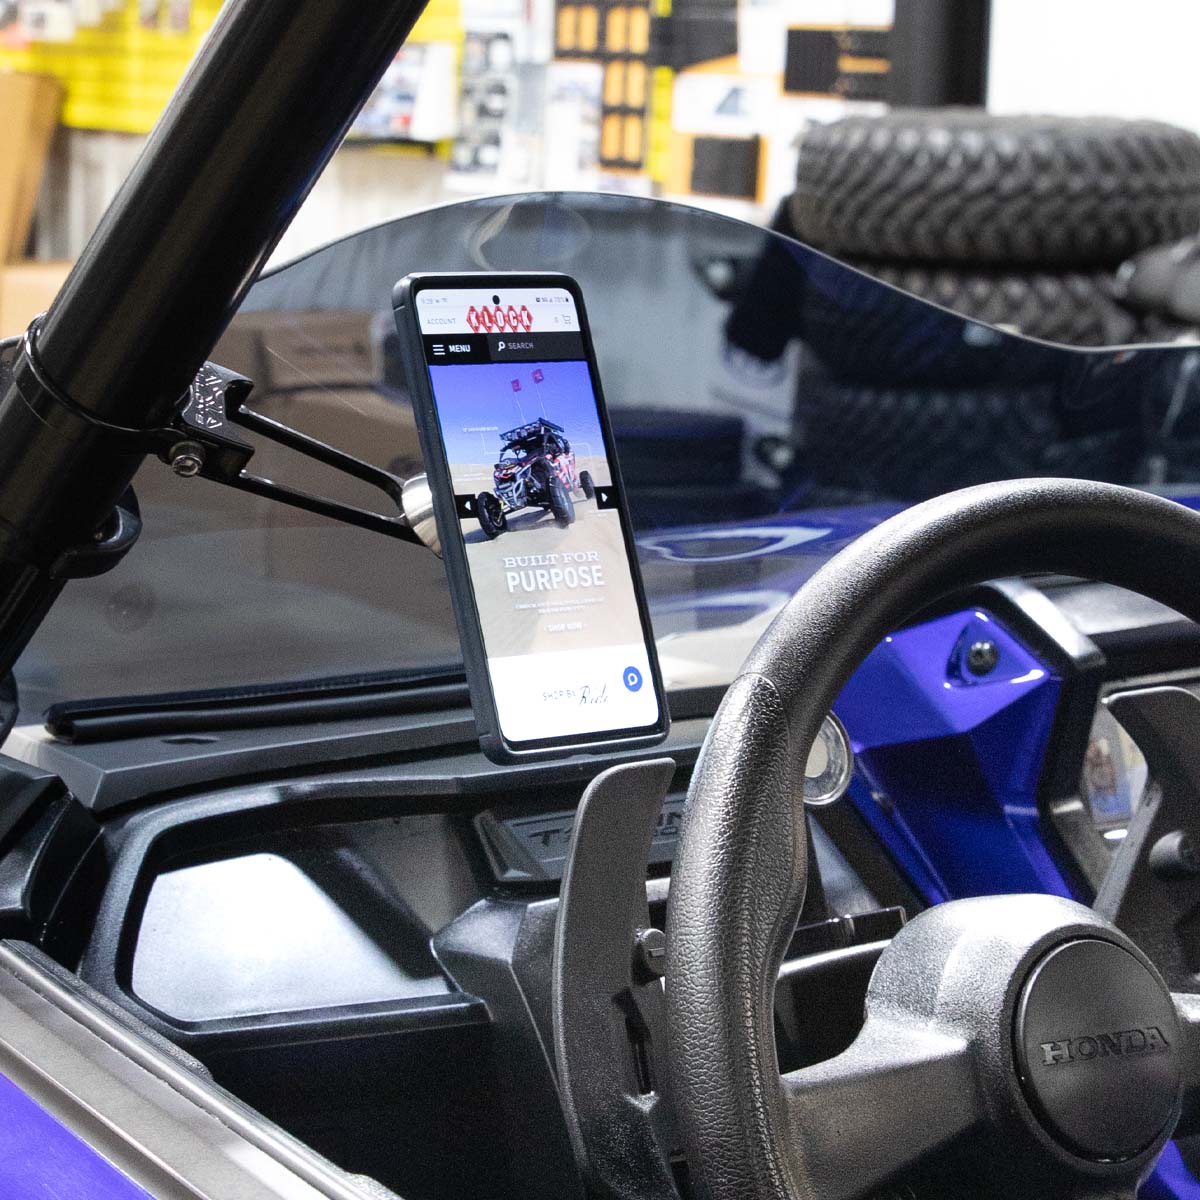 Offset Roll Cage Magnetic Phone Mount is a simple, secure and universal mounting system for your phone or device